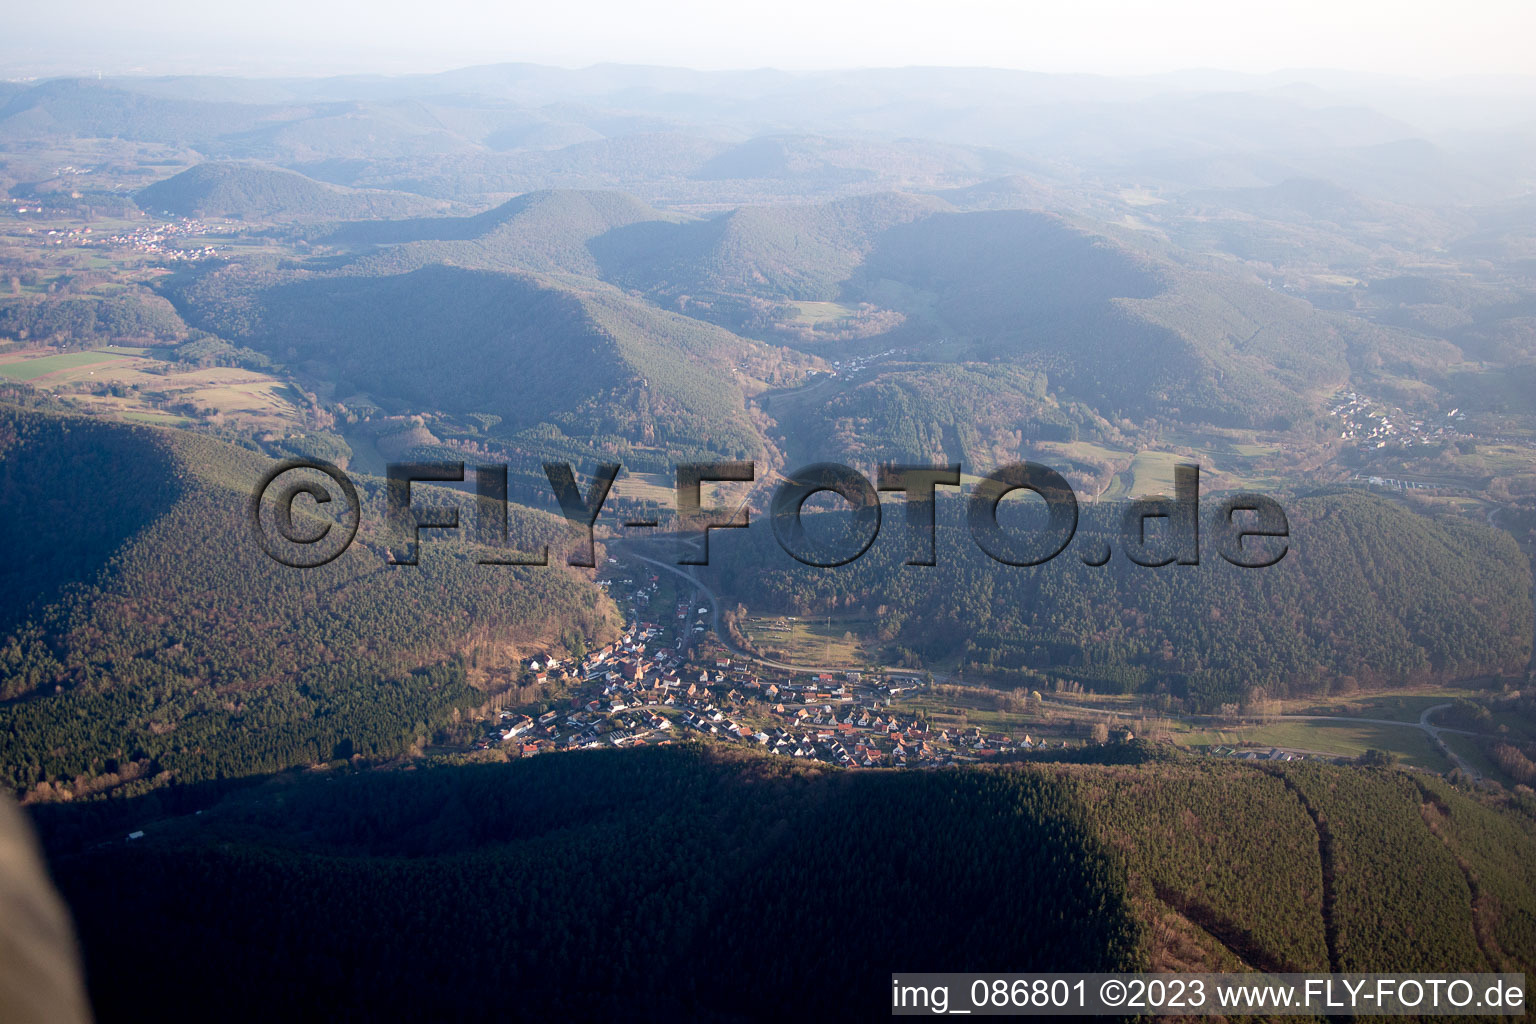 Lug in the state Rhineland-Palatinate, Germany out of the air